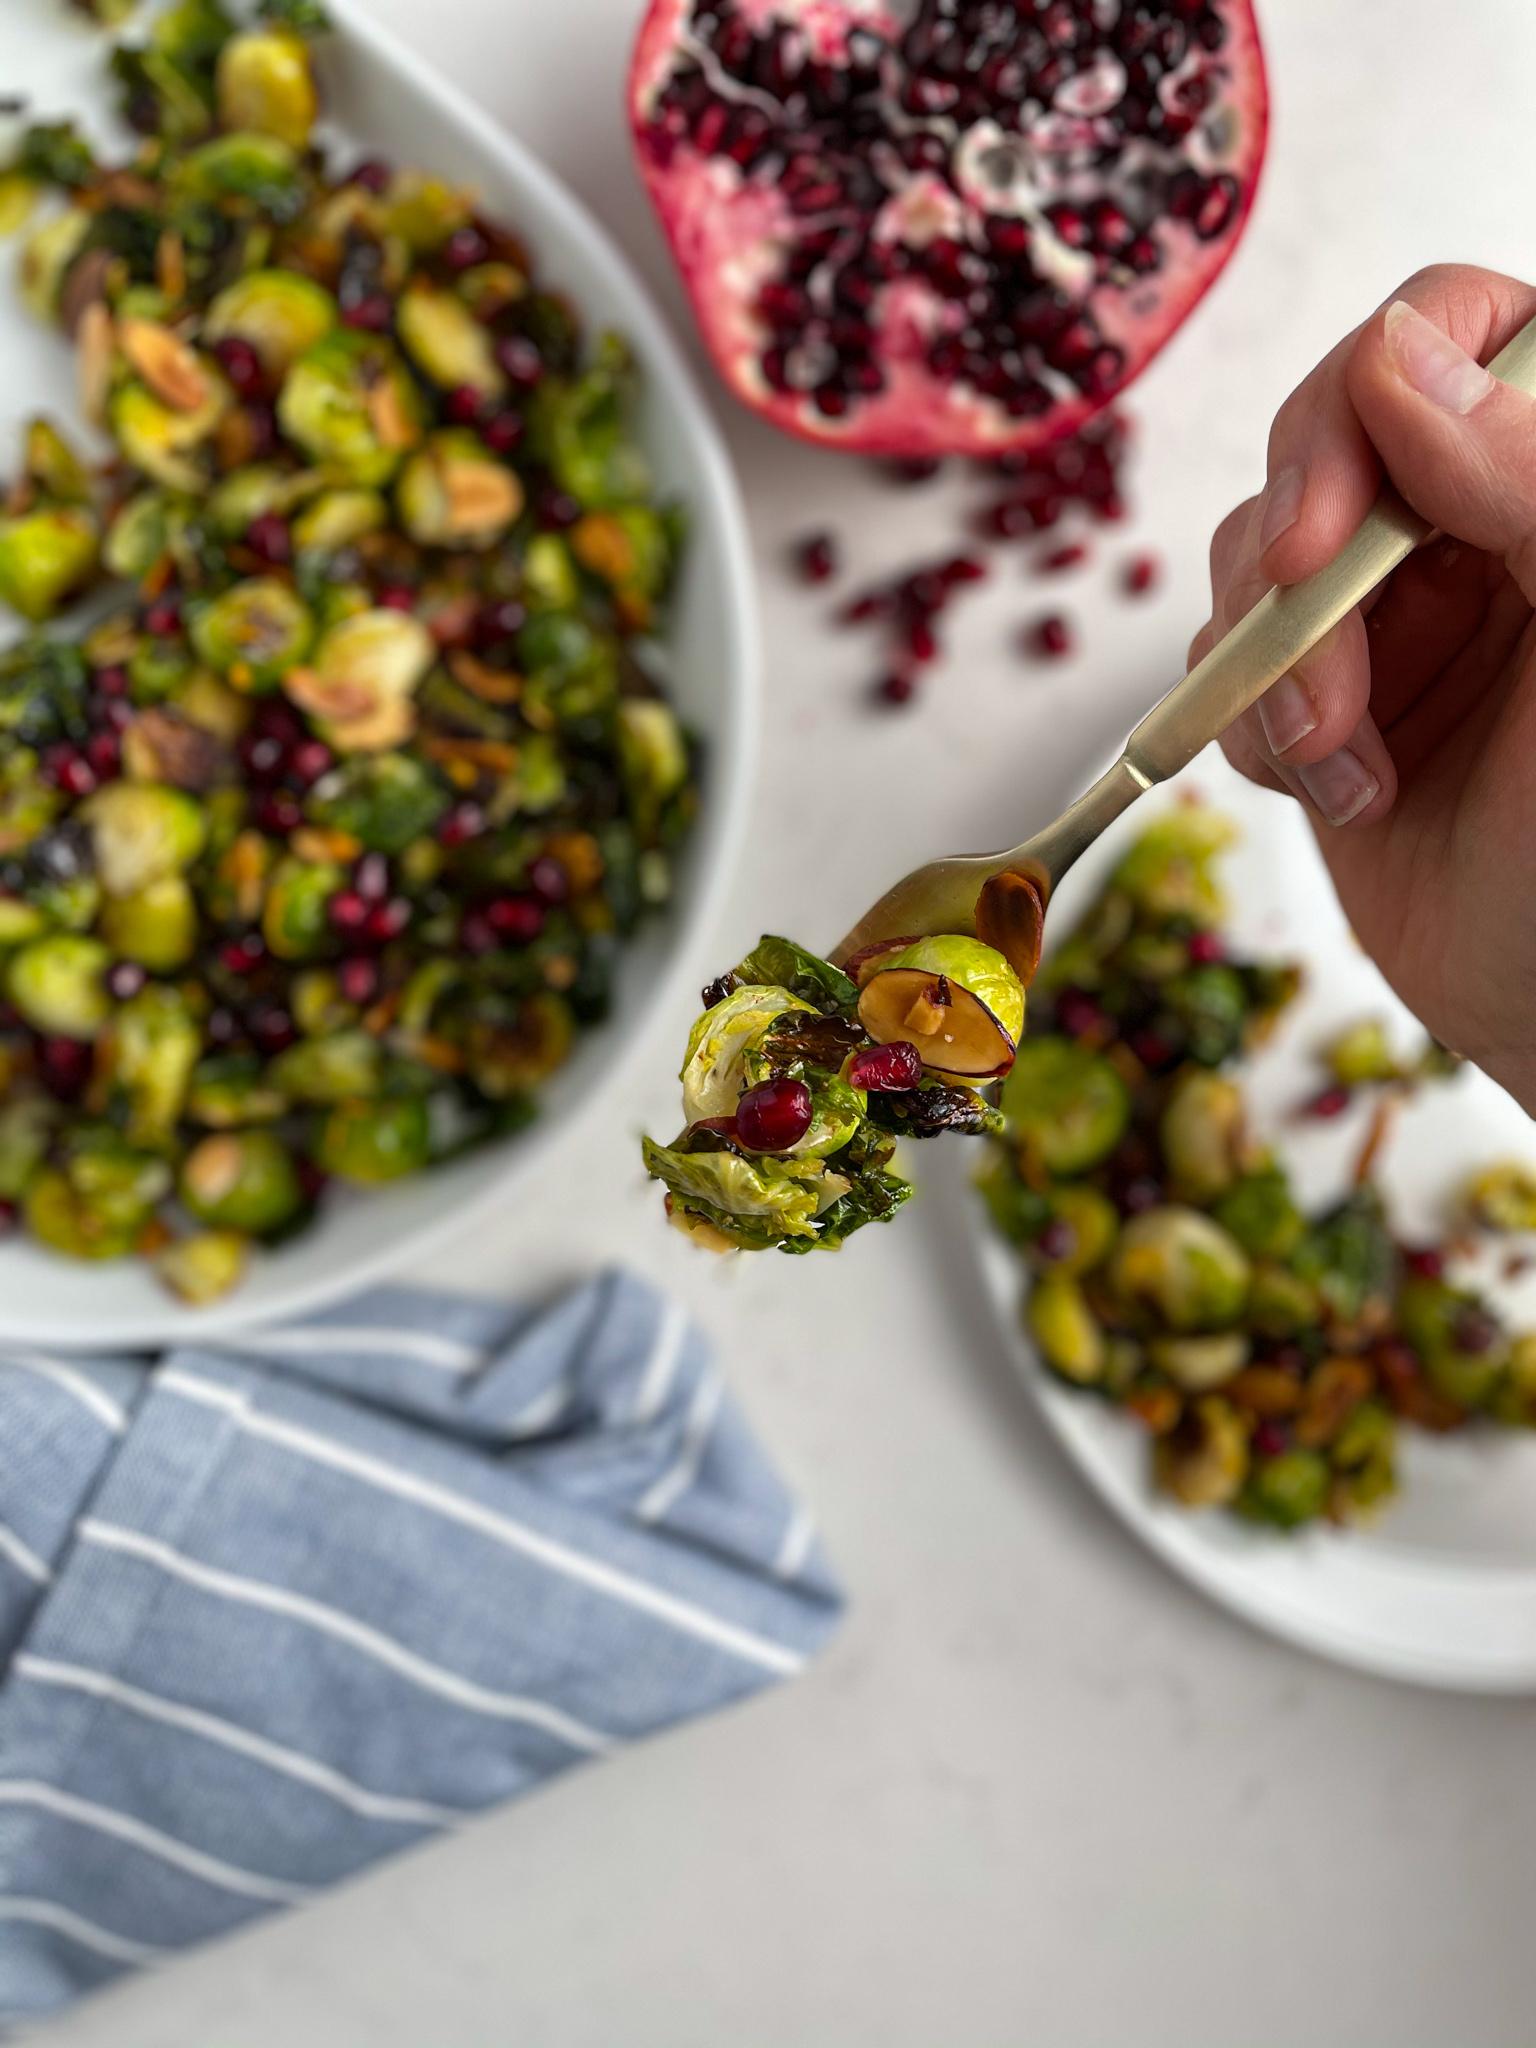 Roasted Brussels Sprouts with Pomegranate Seeds and Almonds